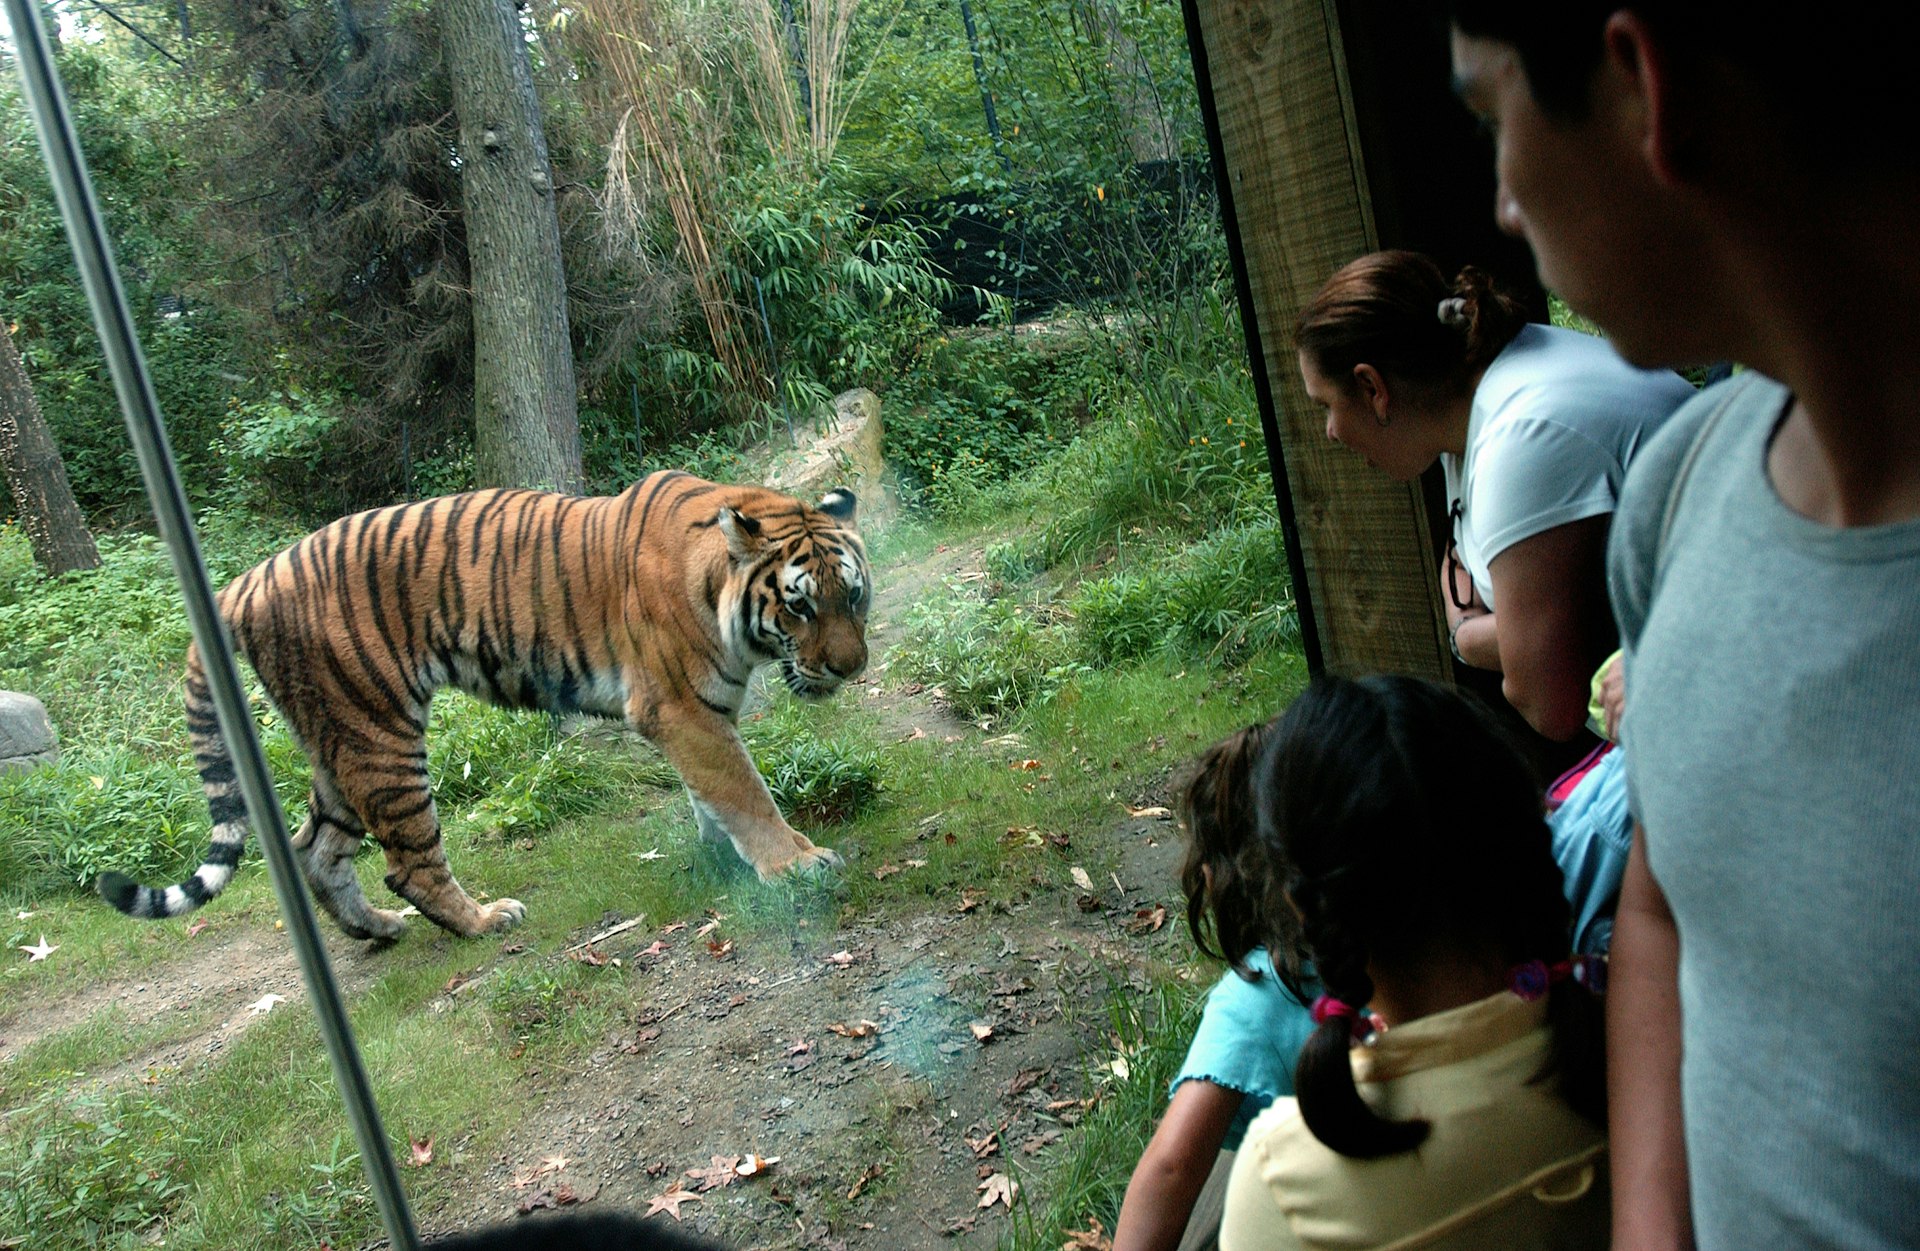 A tiger behind an enclosure while families look on